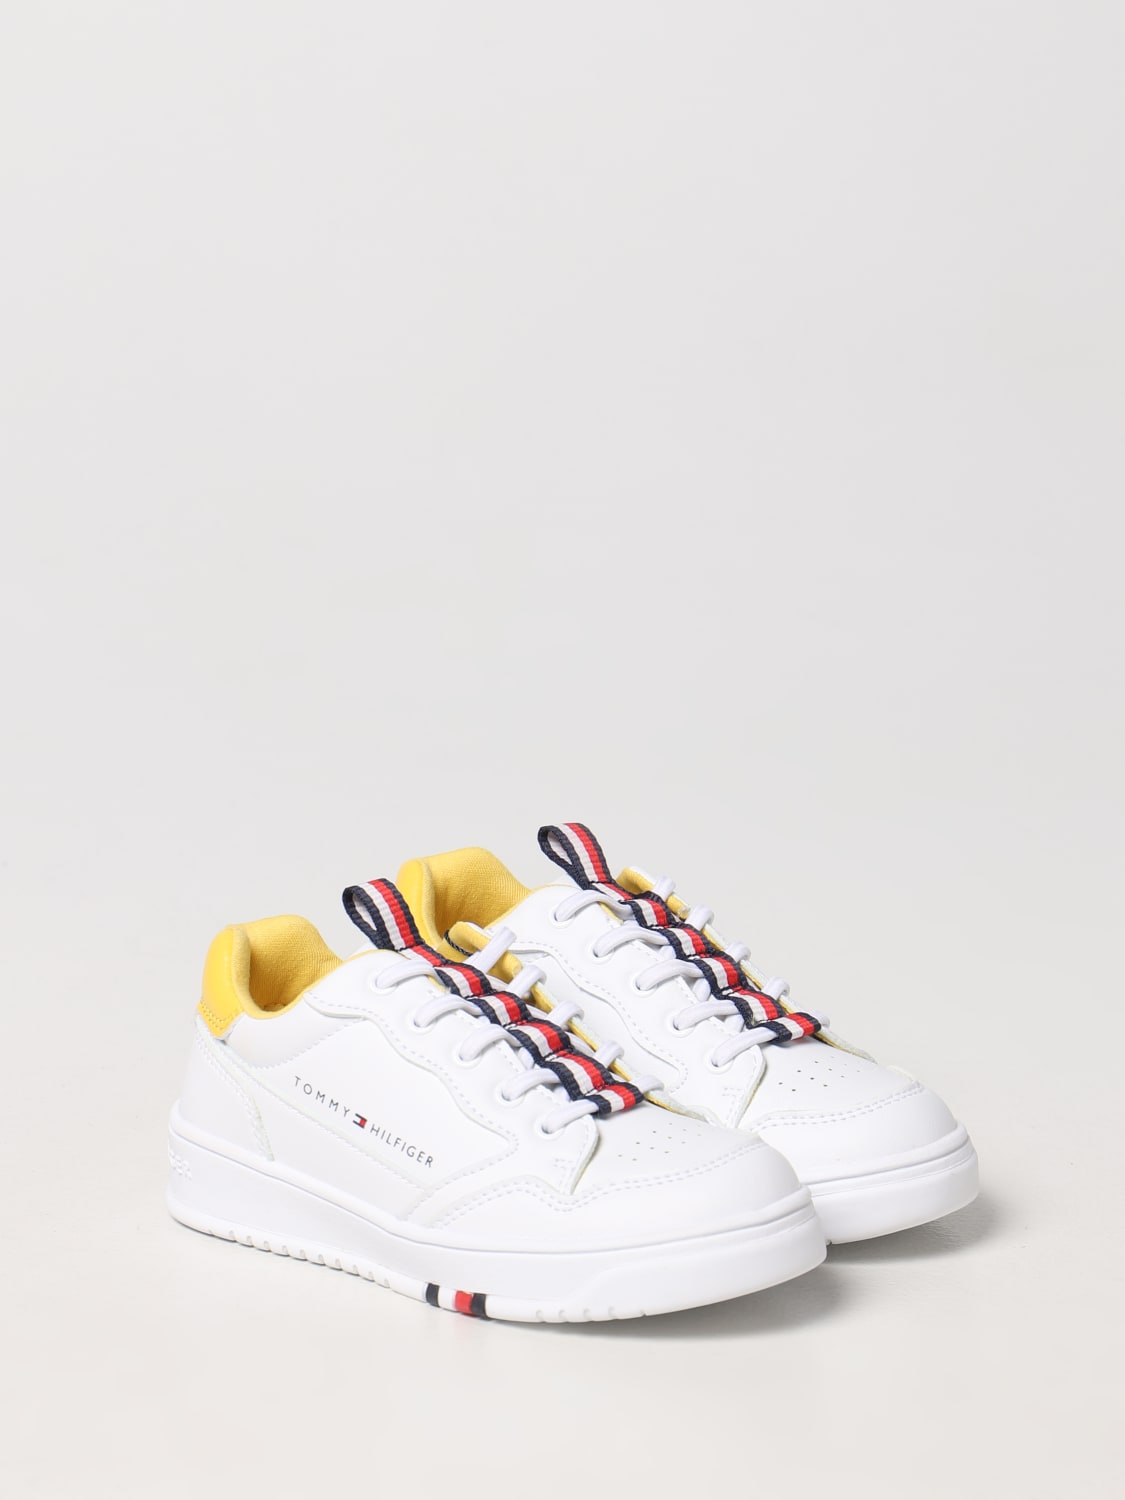 HILFIGER: for boys - White | Tommy Hilfiger sneakers T3X9328531355 online at